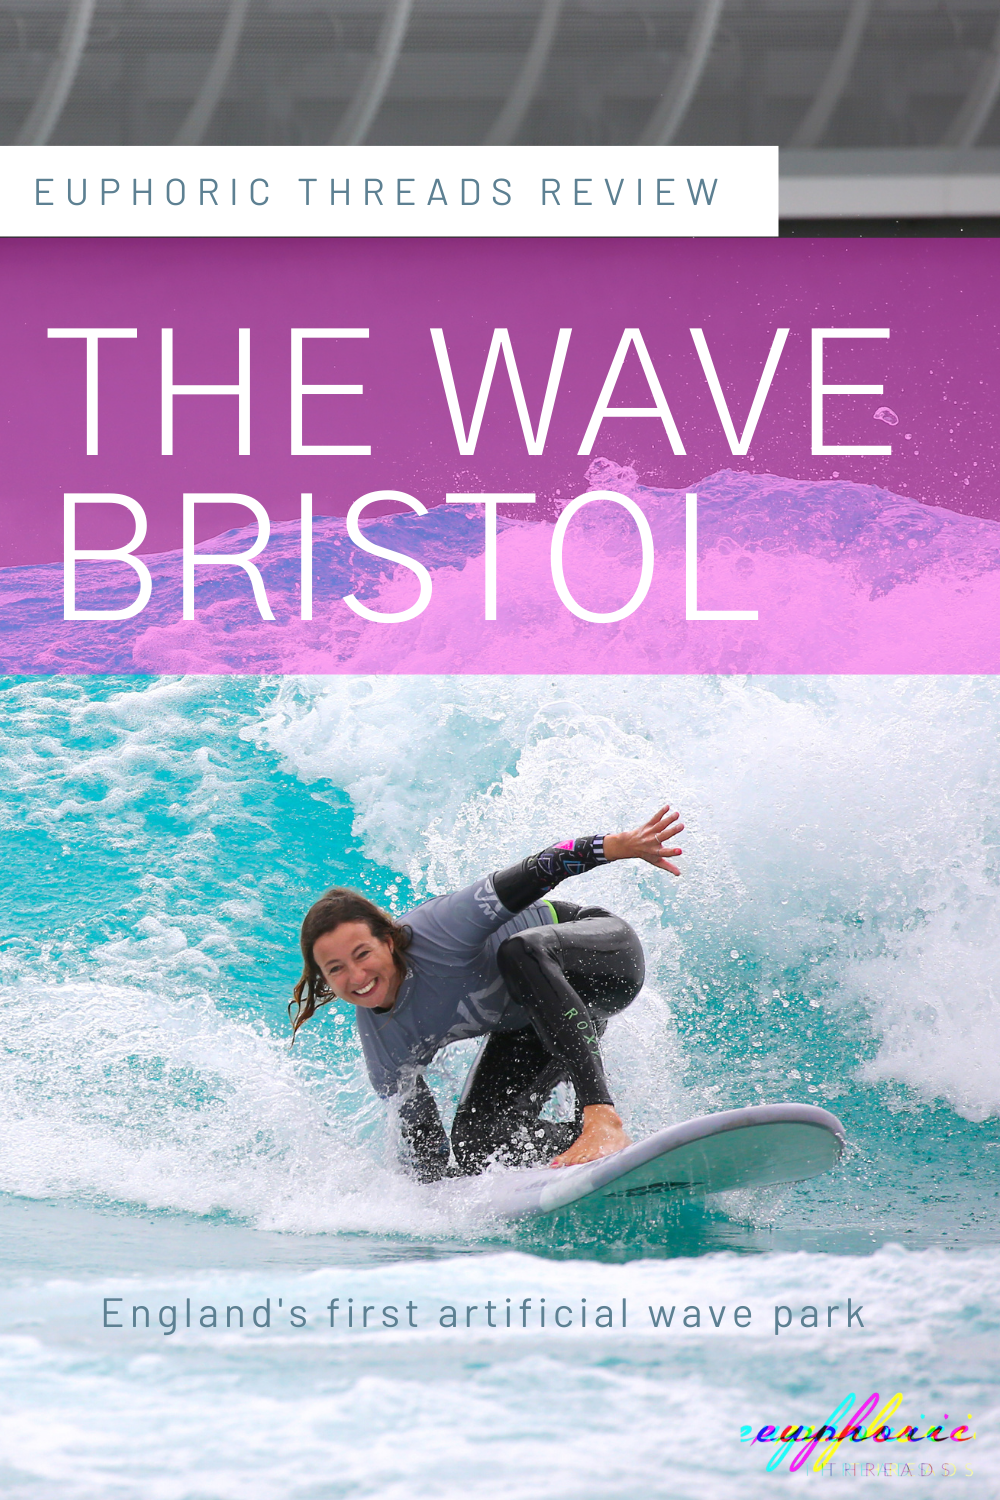 The Wave wavegarden Wave Pool Surf Park in Bristol - The Wave surfing review by Euphoric Threads